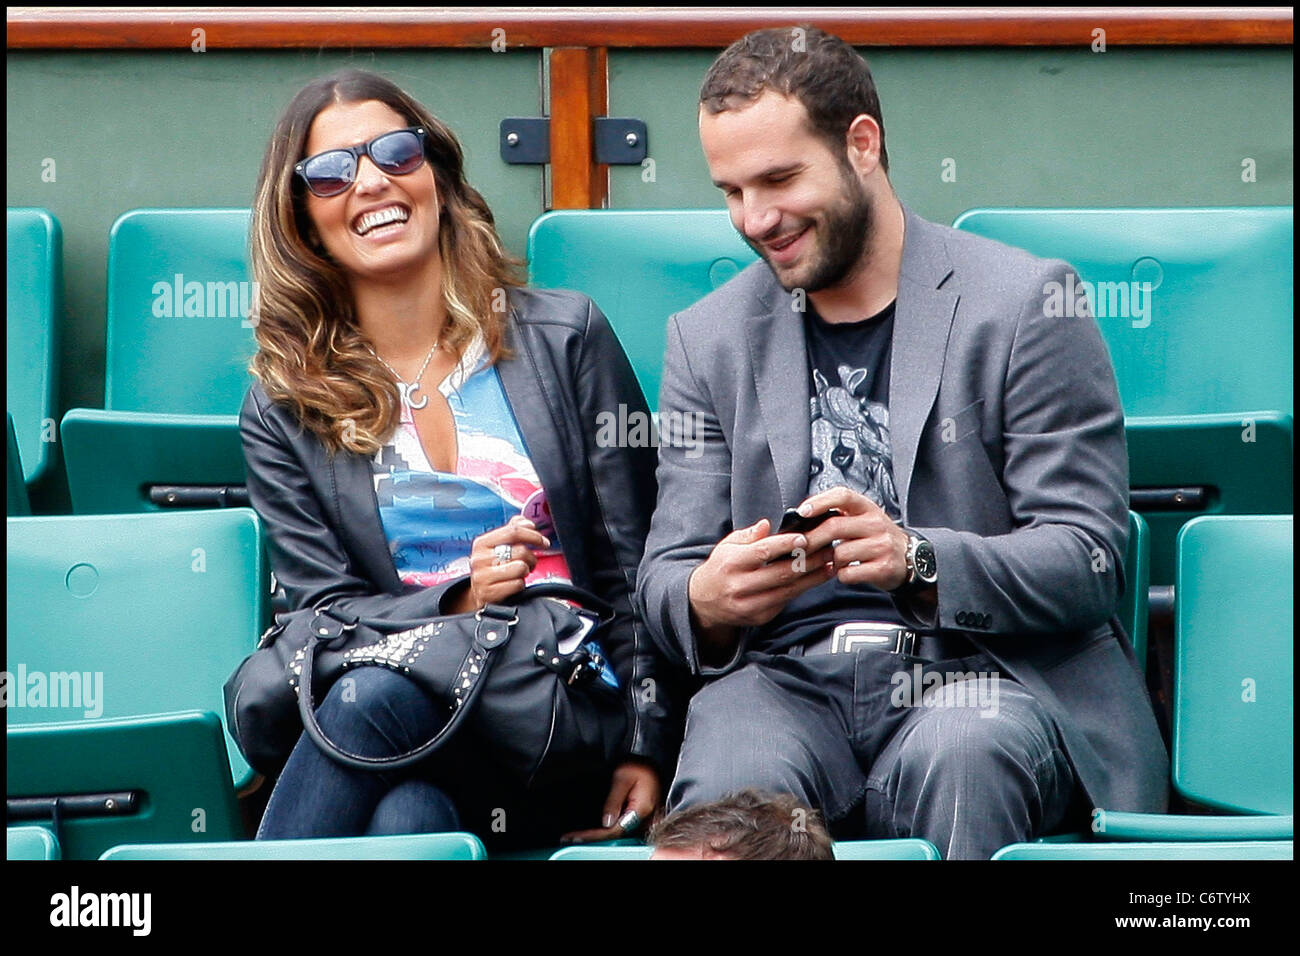 Frederic Michalak and his girlfriend at the 2010 French Open Roland Garros - Day 9 Paris, France - 31.05.10 Stock Photo